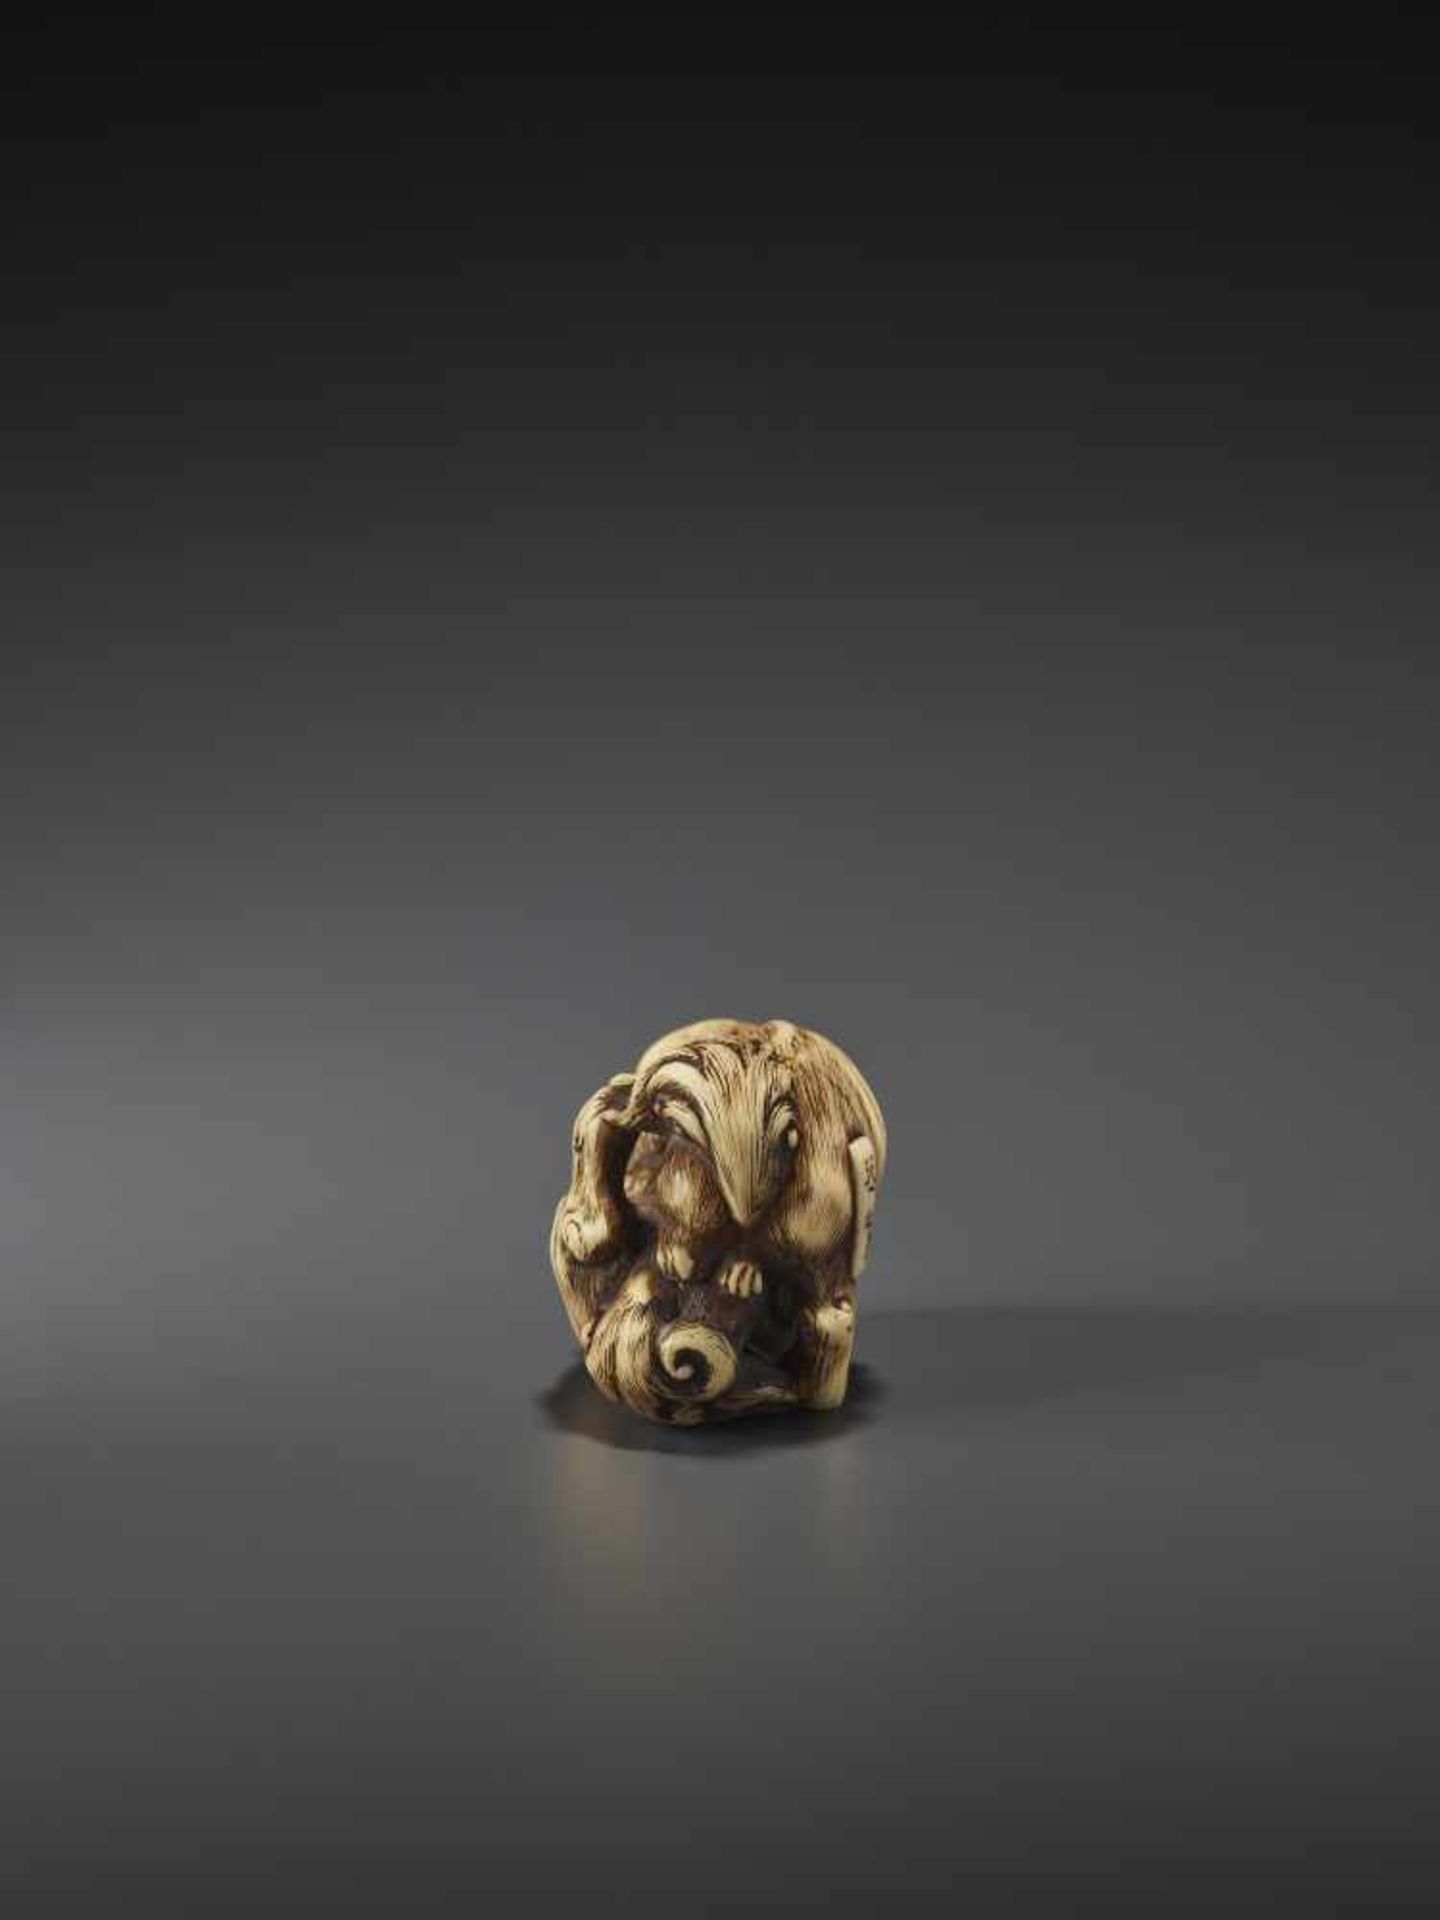 A FINE IVORY NETSUKE OF TWO FIGHTING SHISHI BY KINSHI By Kinshi, ivory netsukeJapan, 19th century, - Image 5 of 10